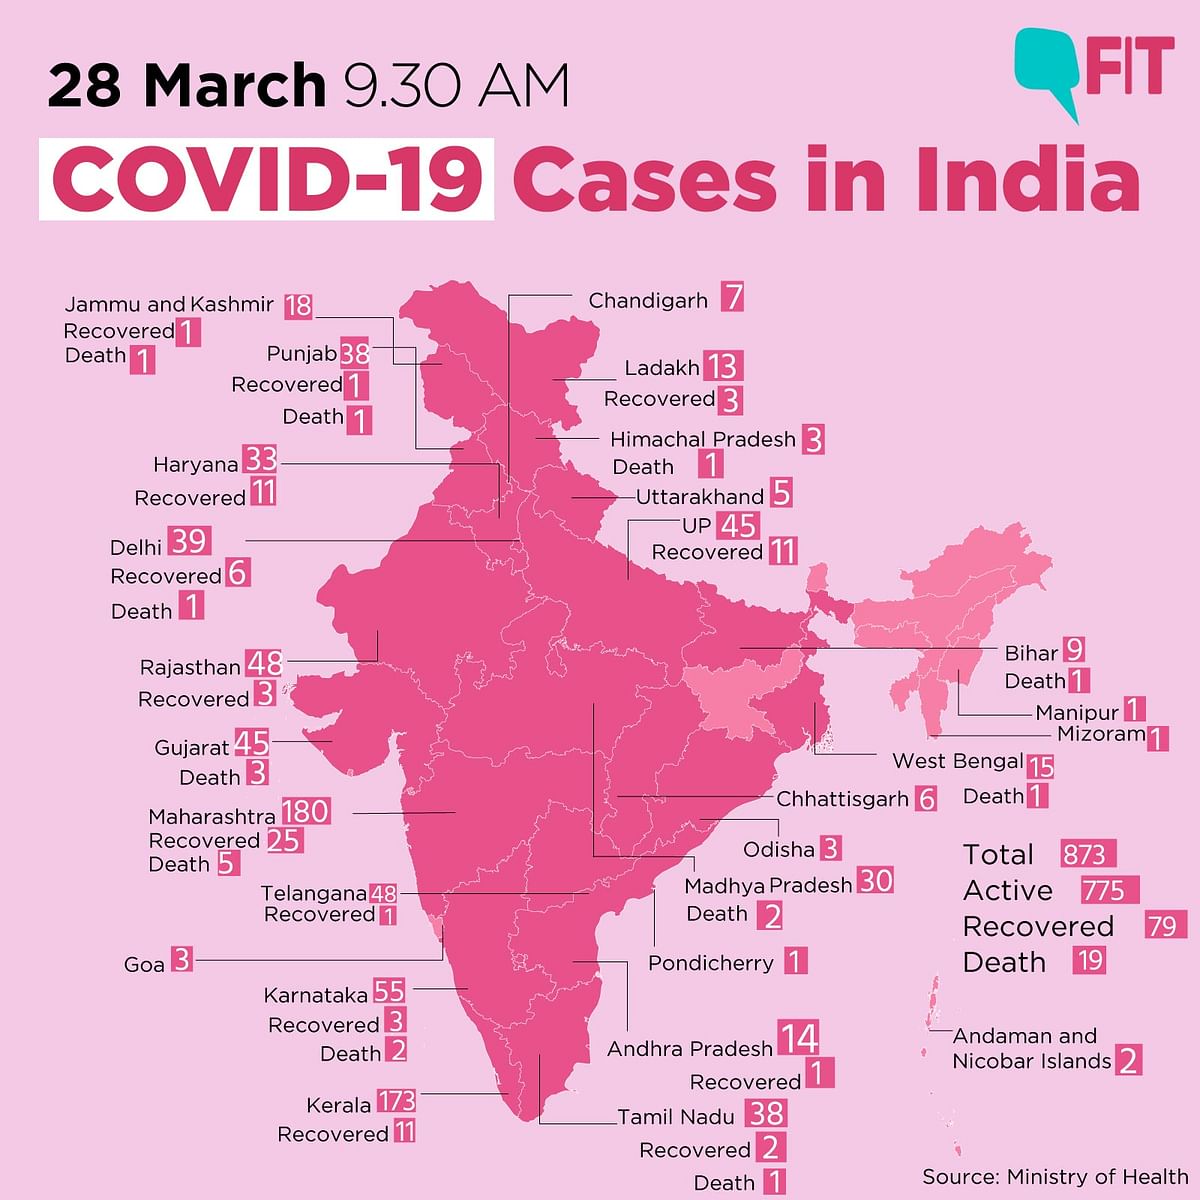 COVID-19 India Updates: Total Cases at 873 & Death Toll at 19